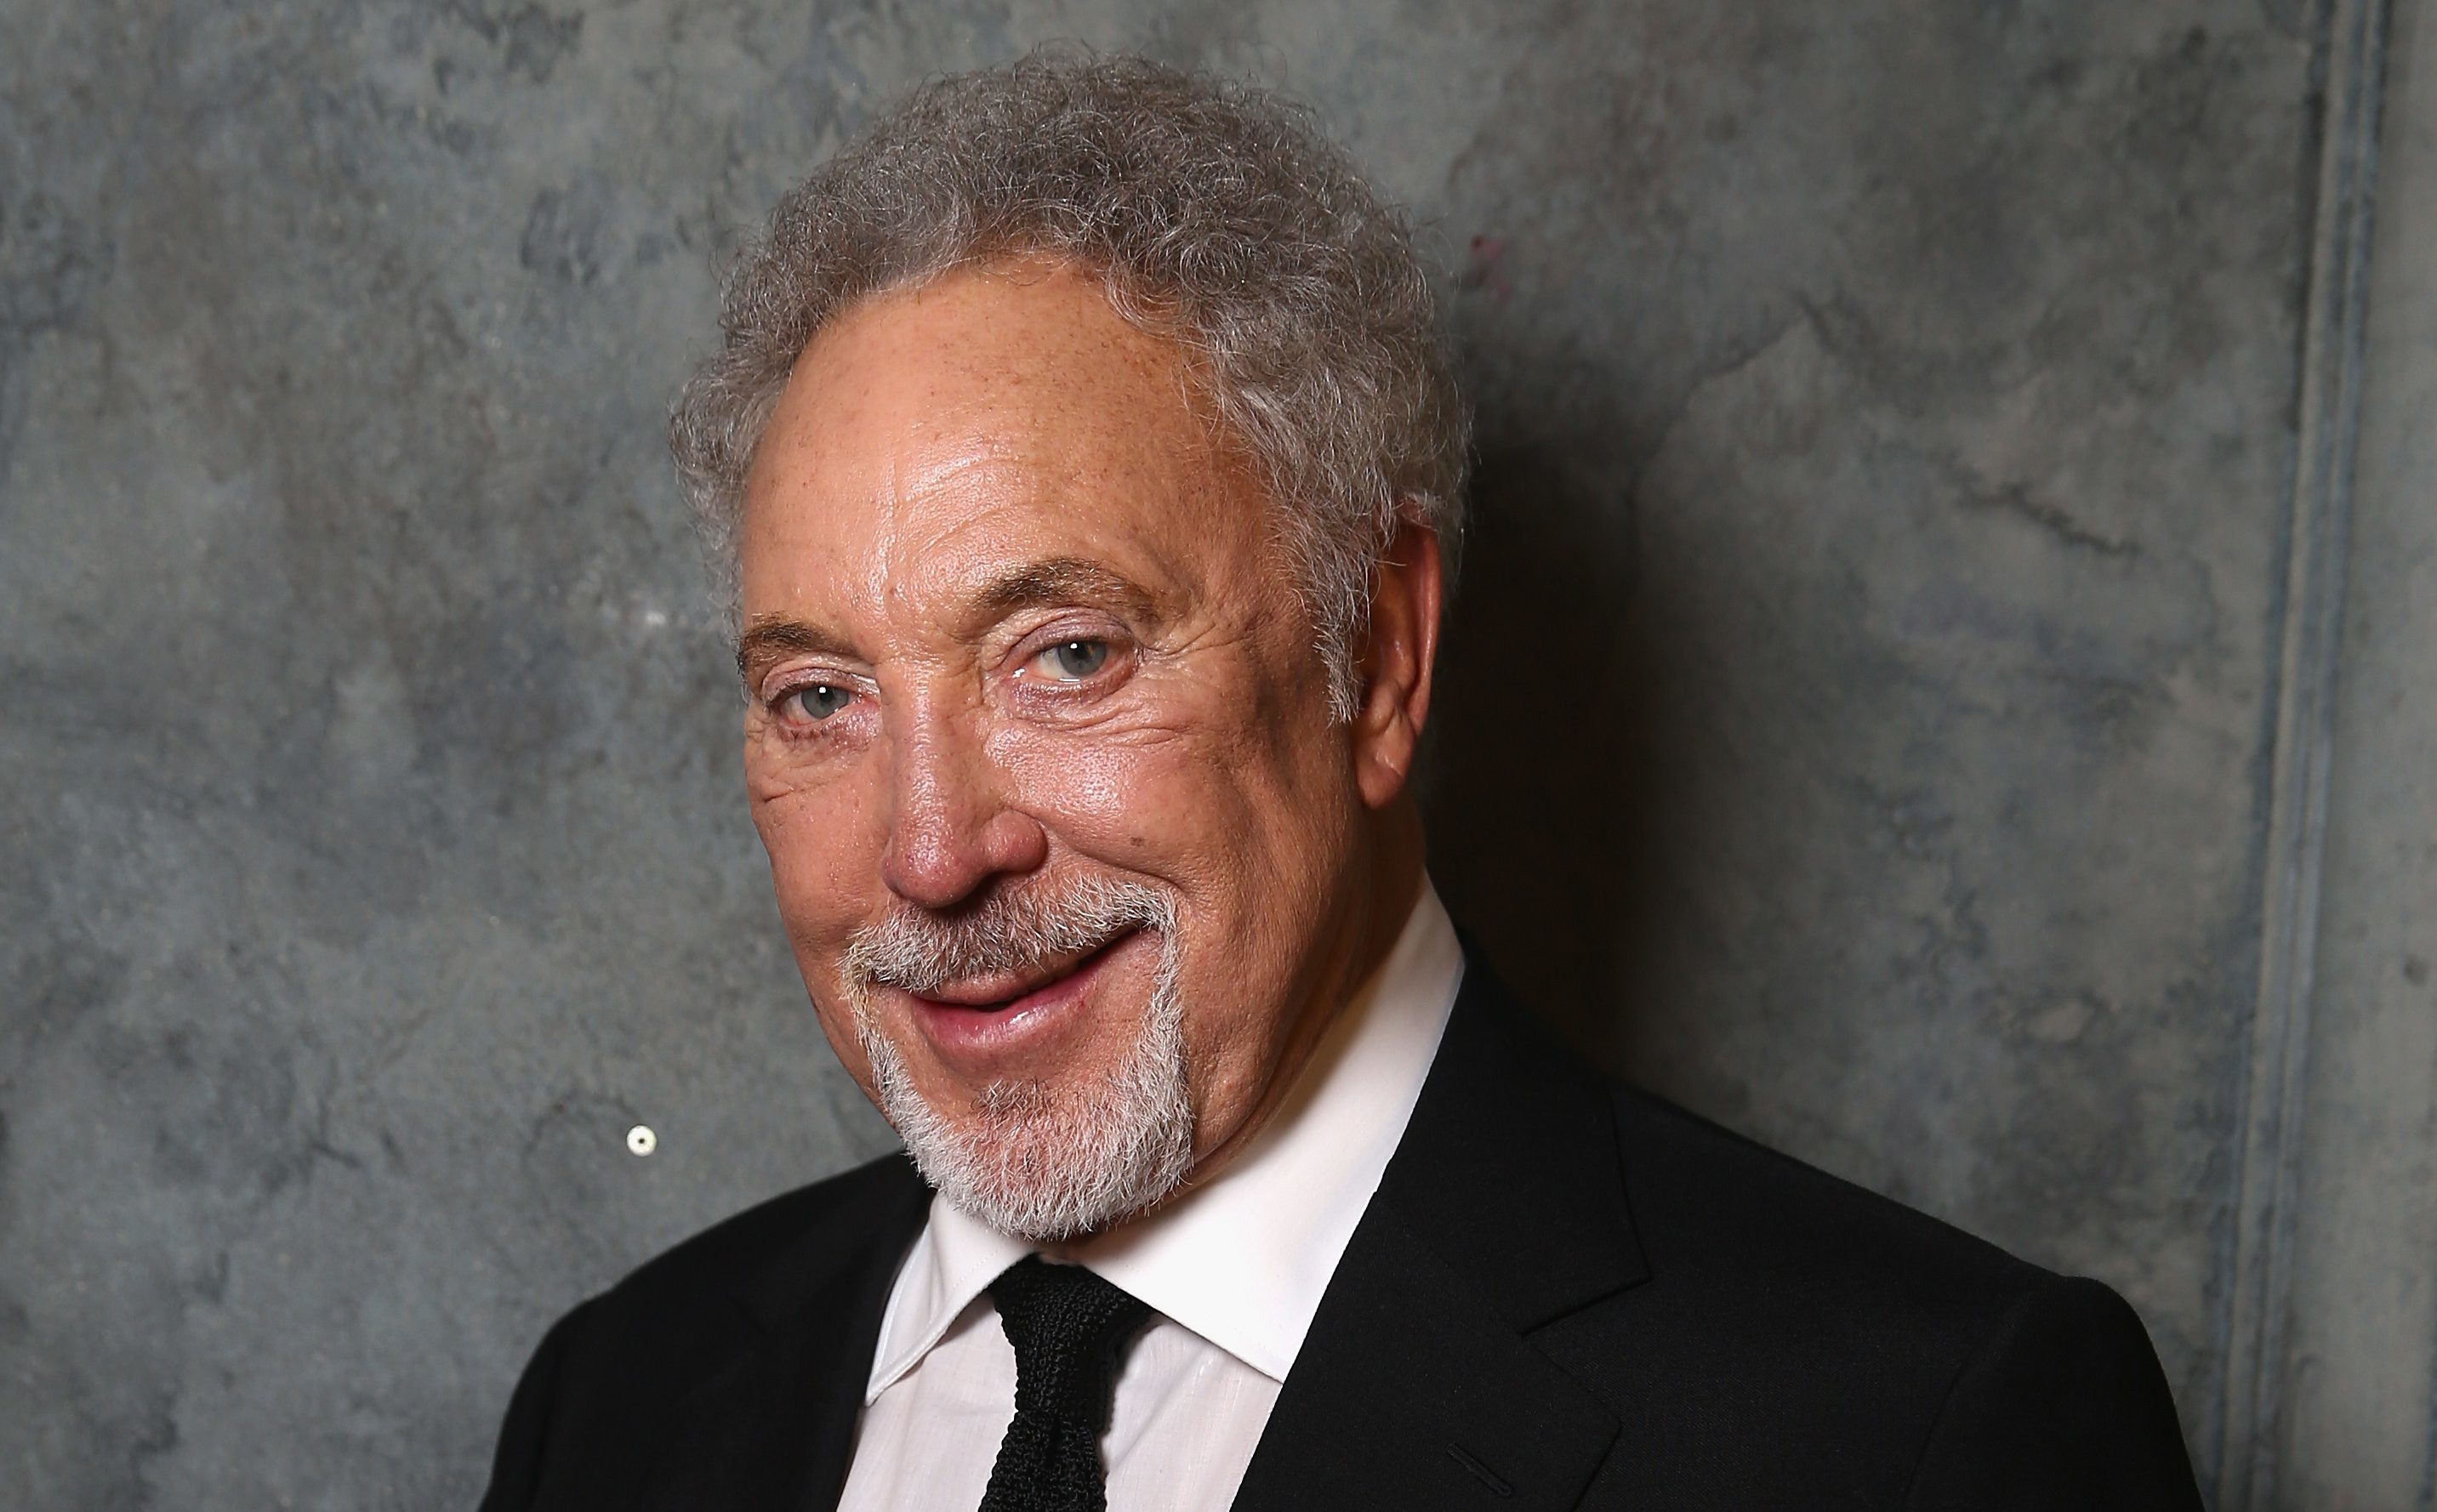 Judges revealed for first ITV series of The Voice… and Sir Tom Jones is